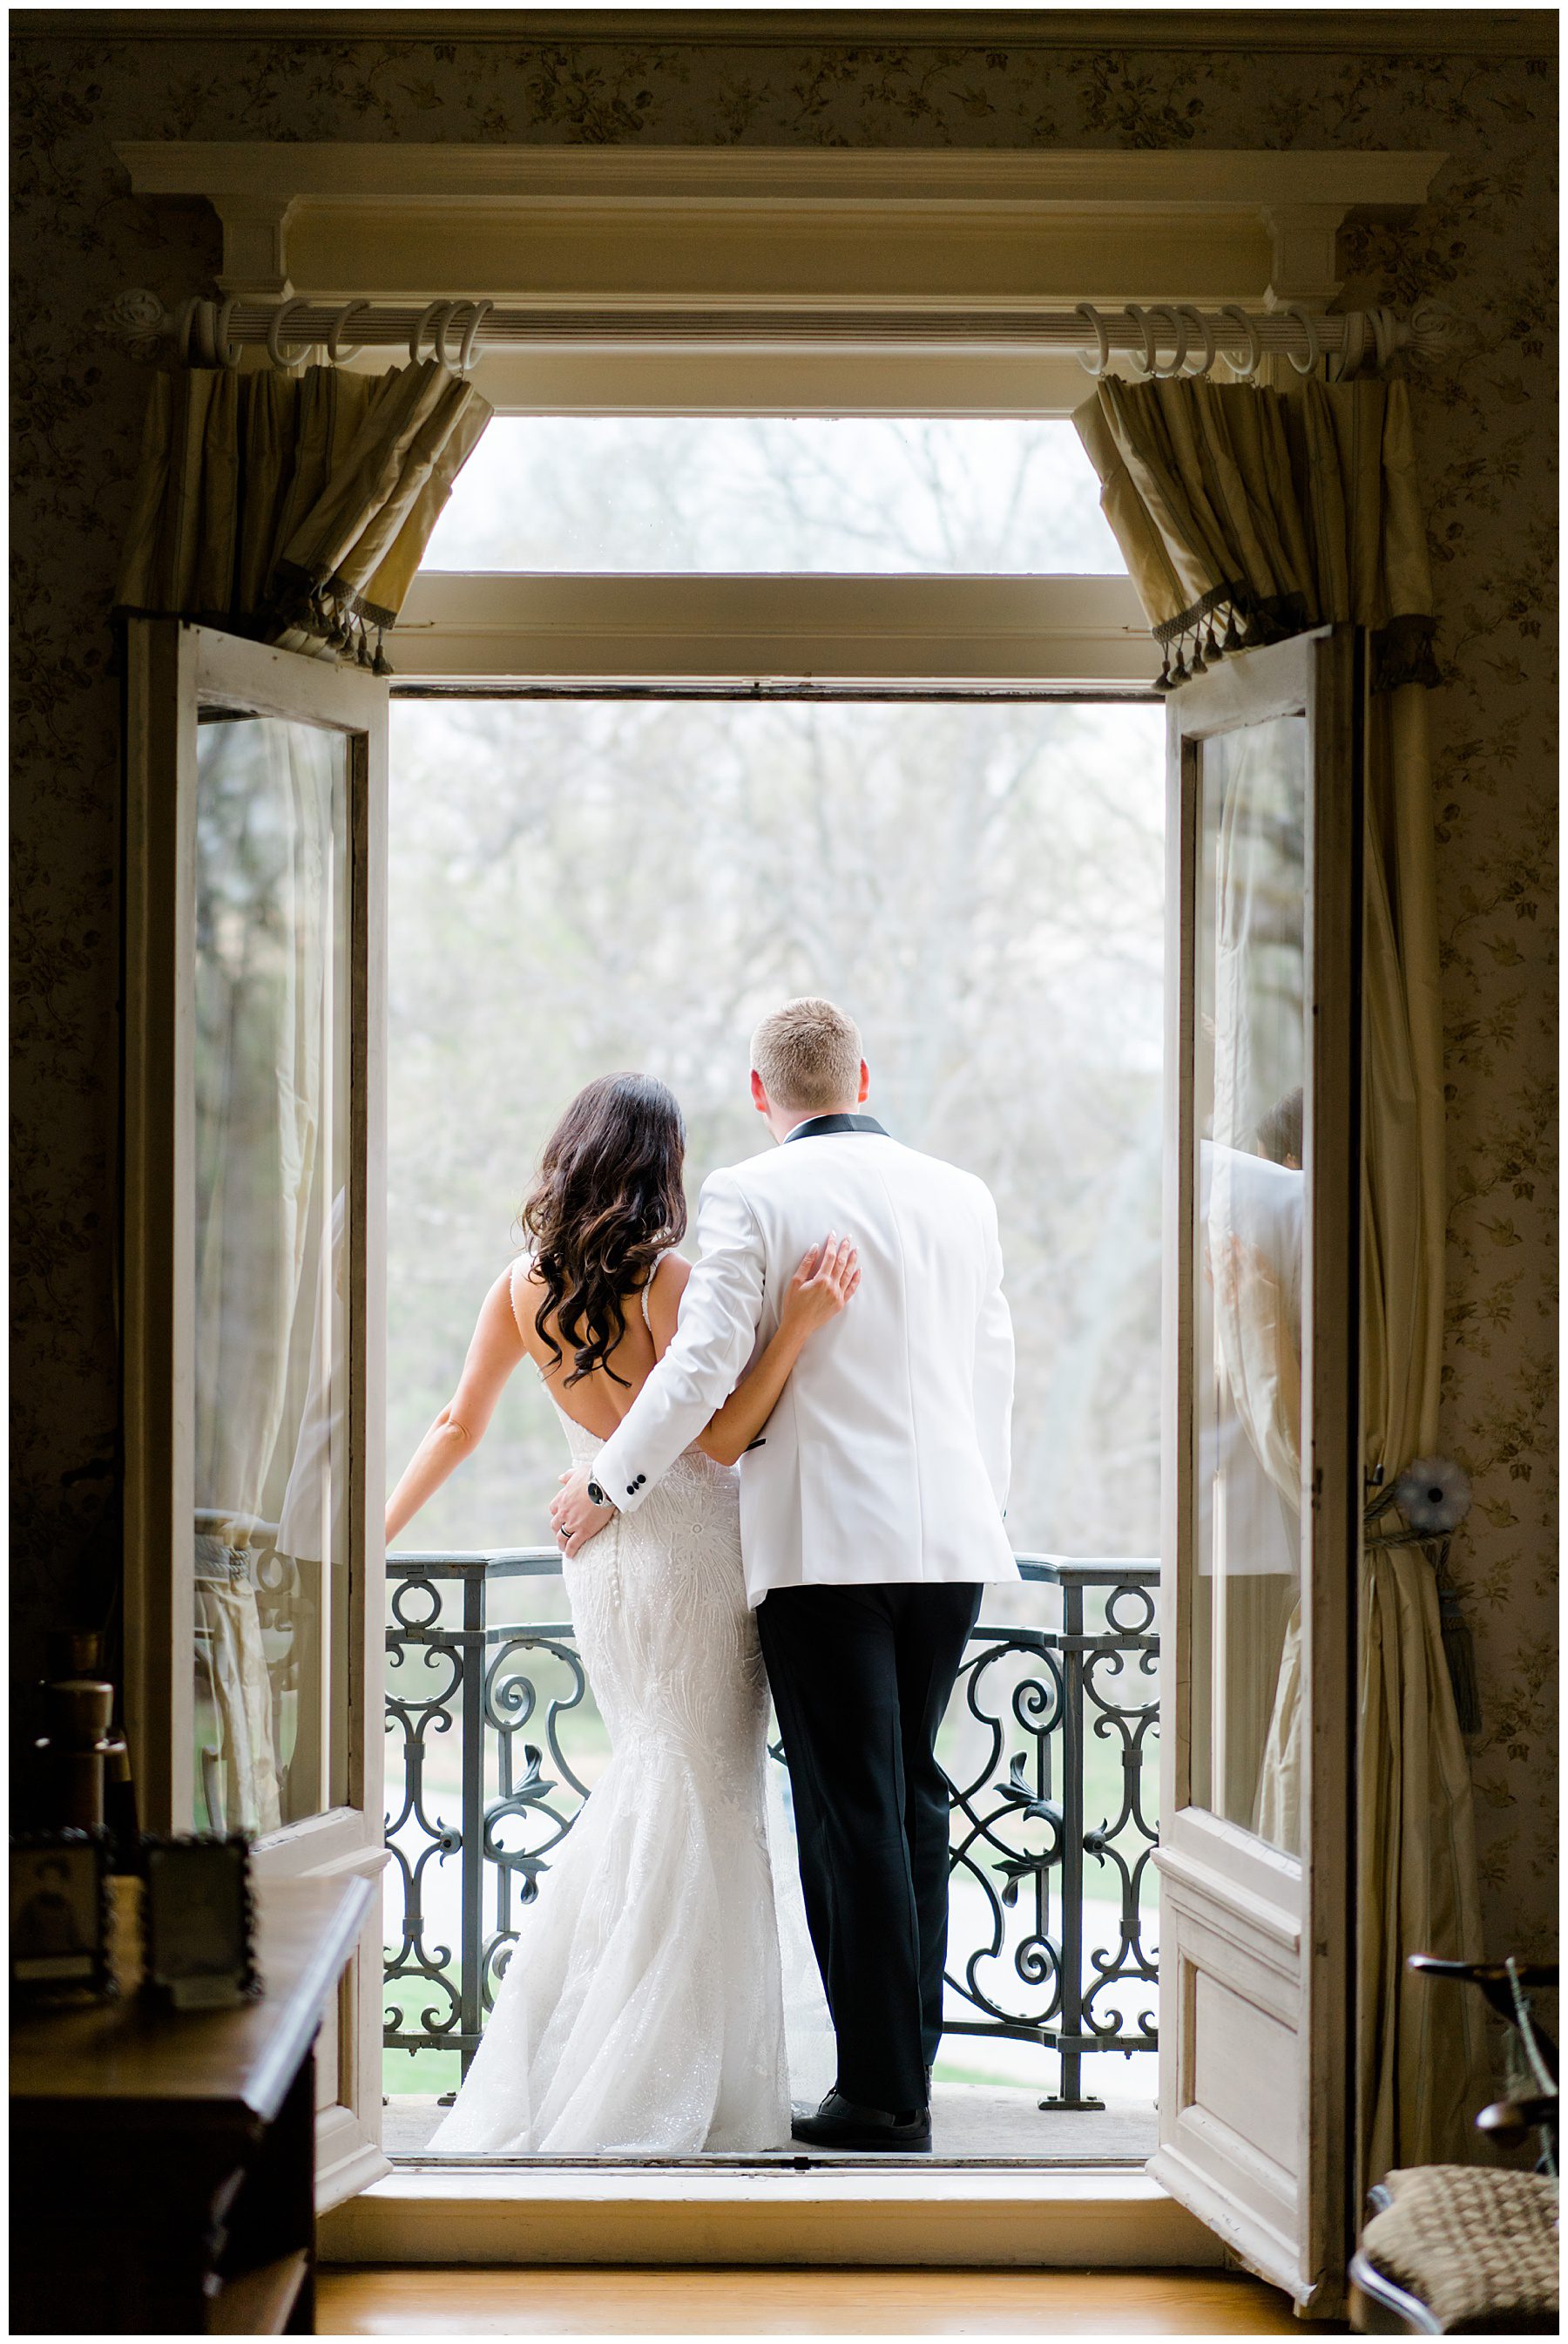 newlyweds on the balcony at Cairnwood Estate Wedding in Bryn Athyn, PA